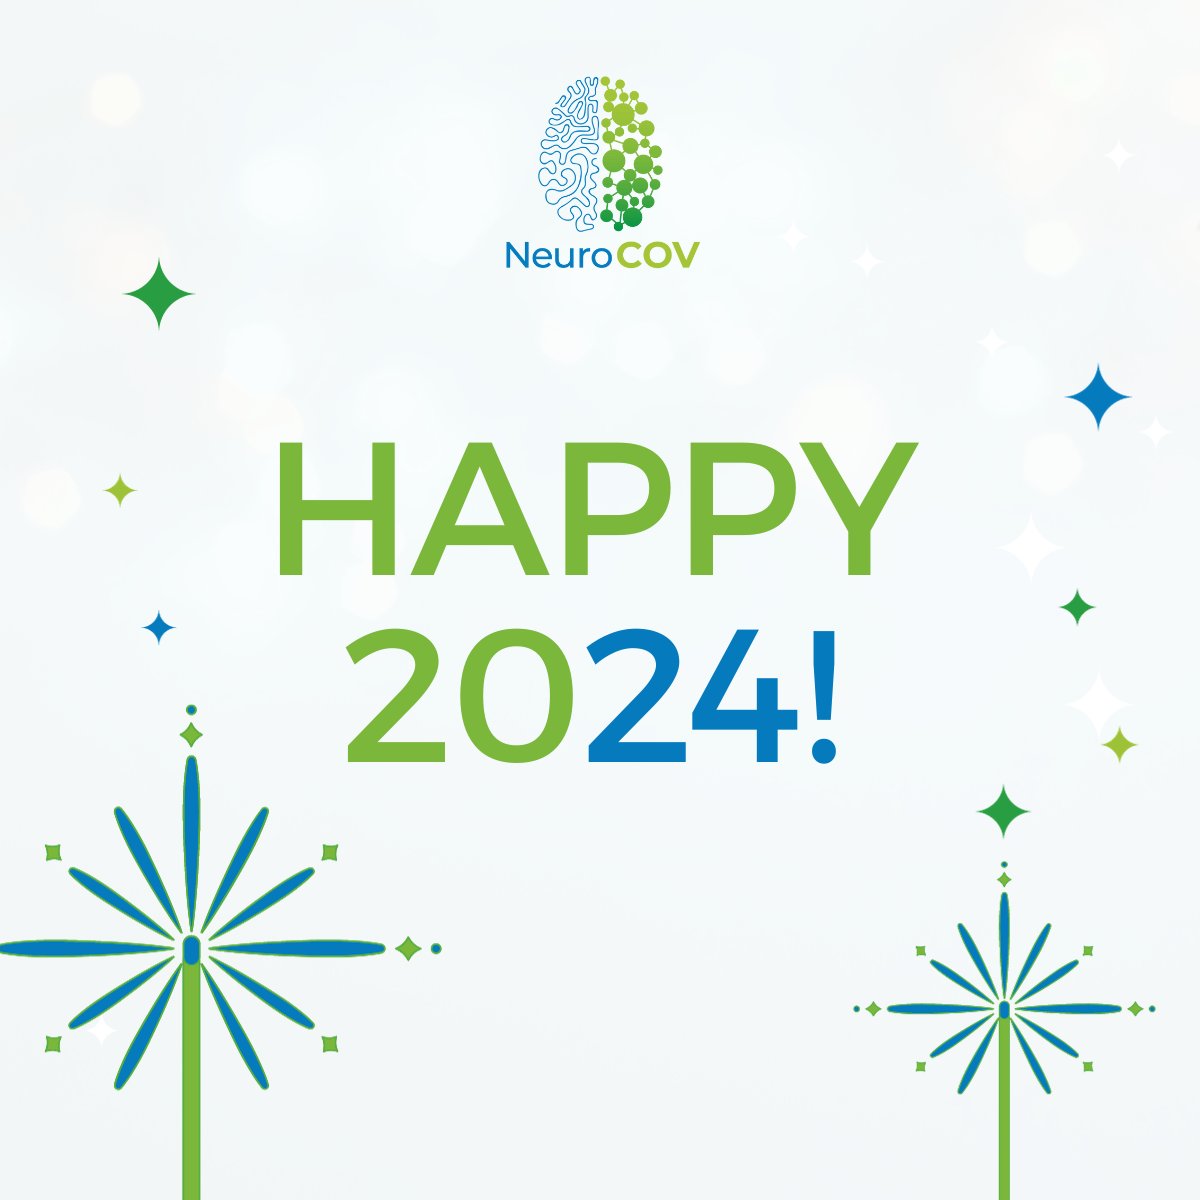 🎇Wishing you a joyful, healthy, and successful New Year! Our partners are excited to bring you the latest #research updates on #NeuroCOVID in 2024 - stay tuned! #NeuroCOV